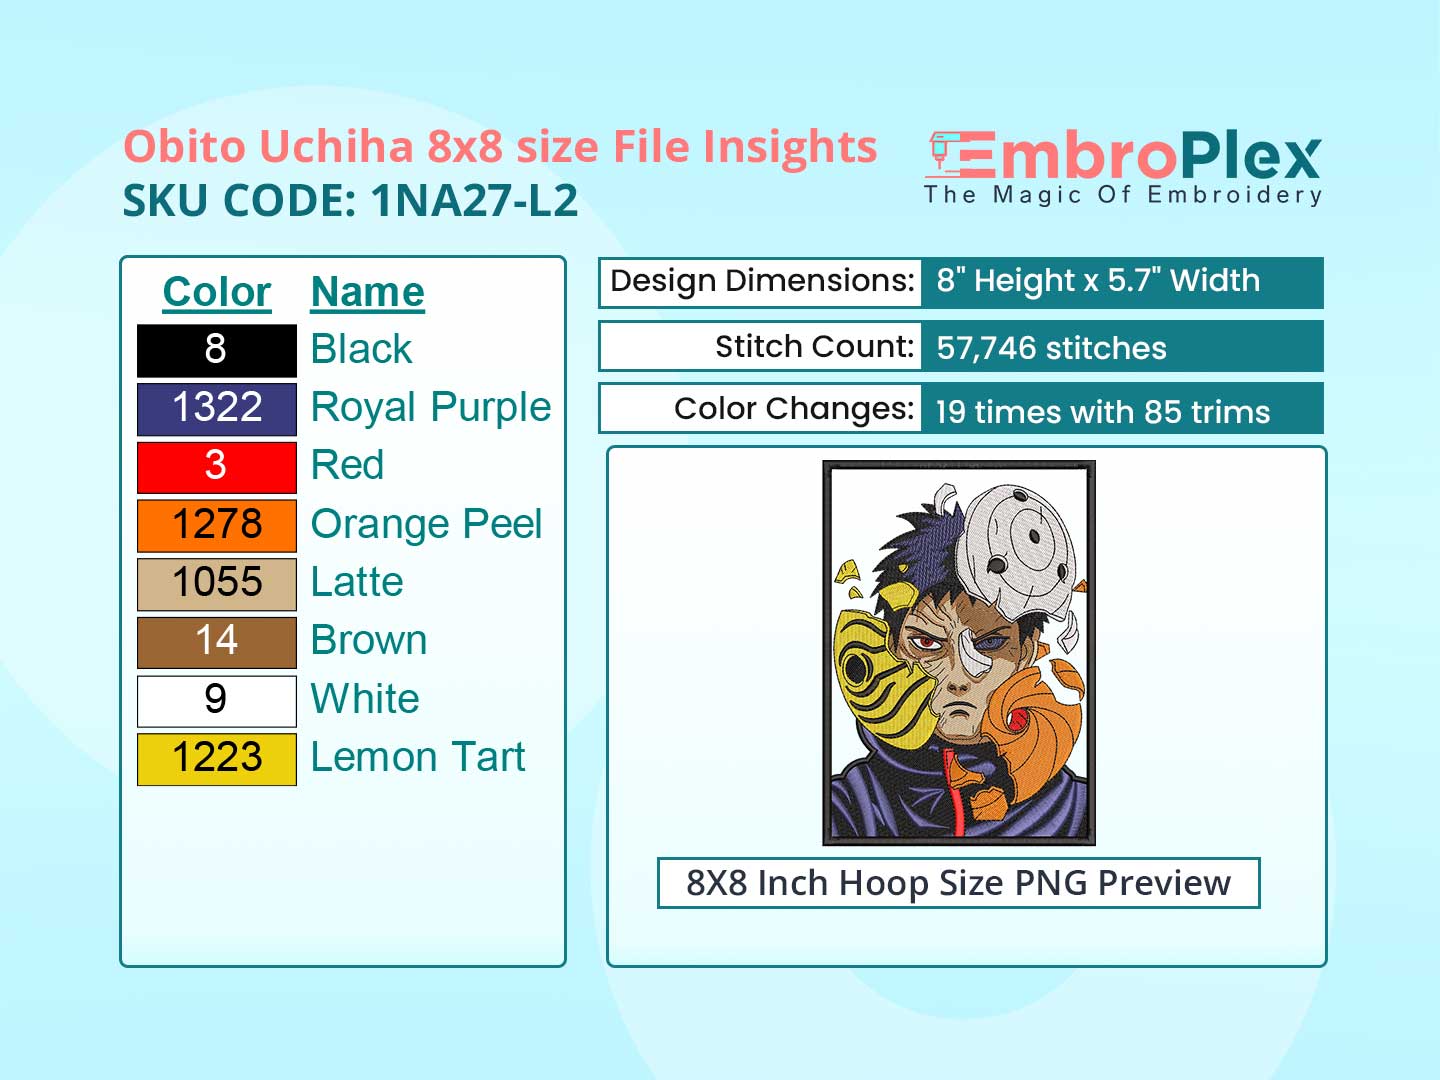 Anime-Inspired Obito Uchiha Embroidery Design File - 8x8 Inch hoop Size Variation overview image